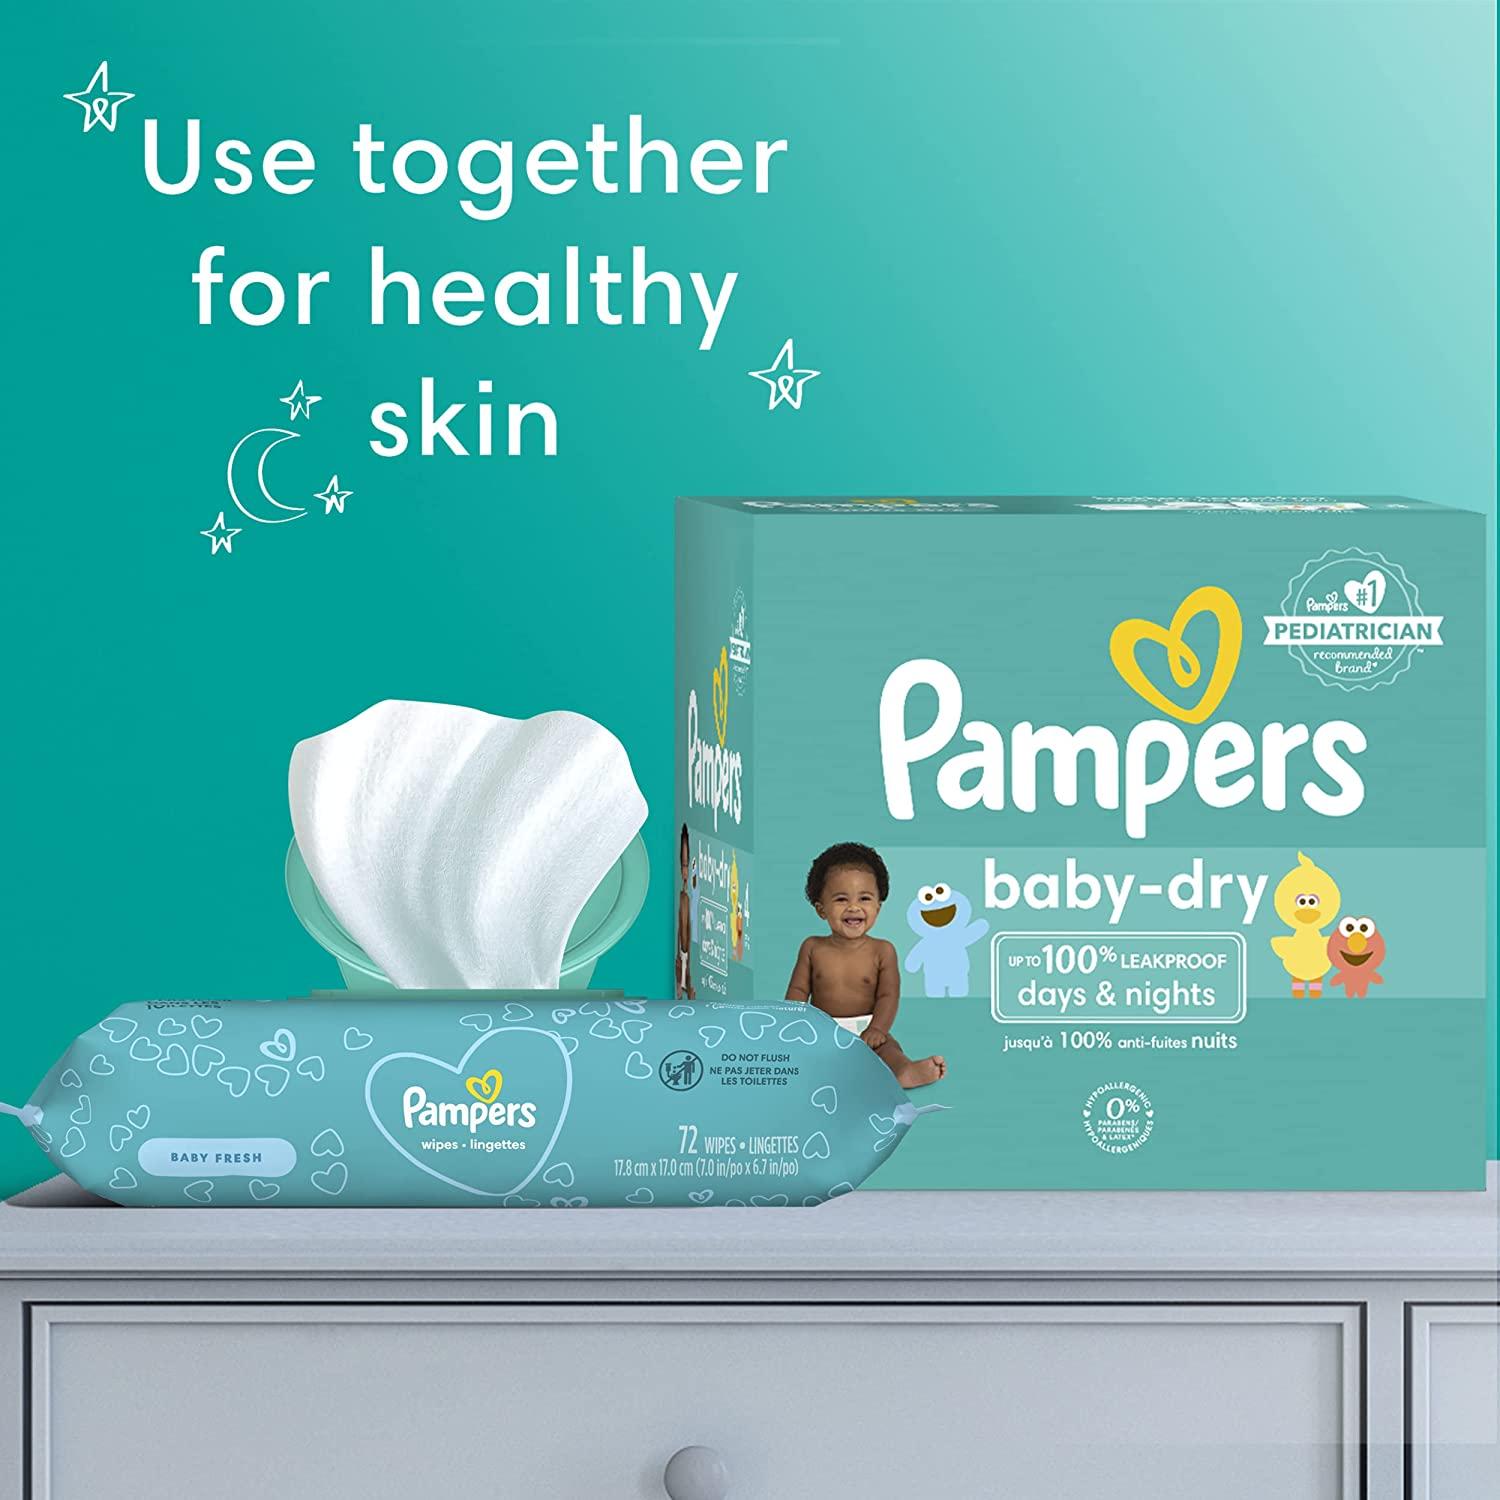 Pampers Baby-Dry Taille 2, 120 Couches